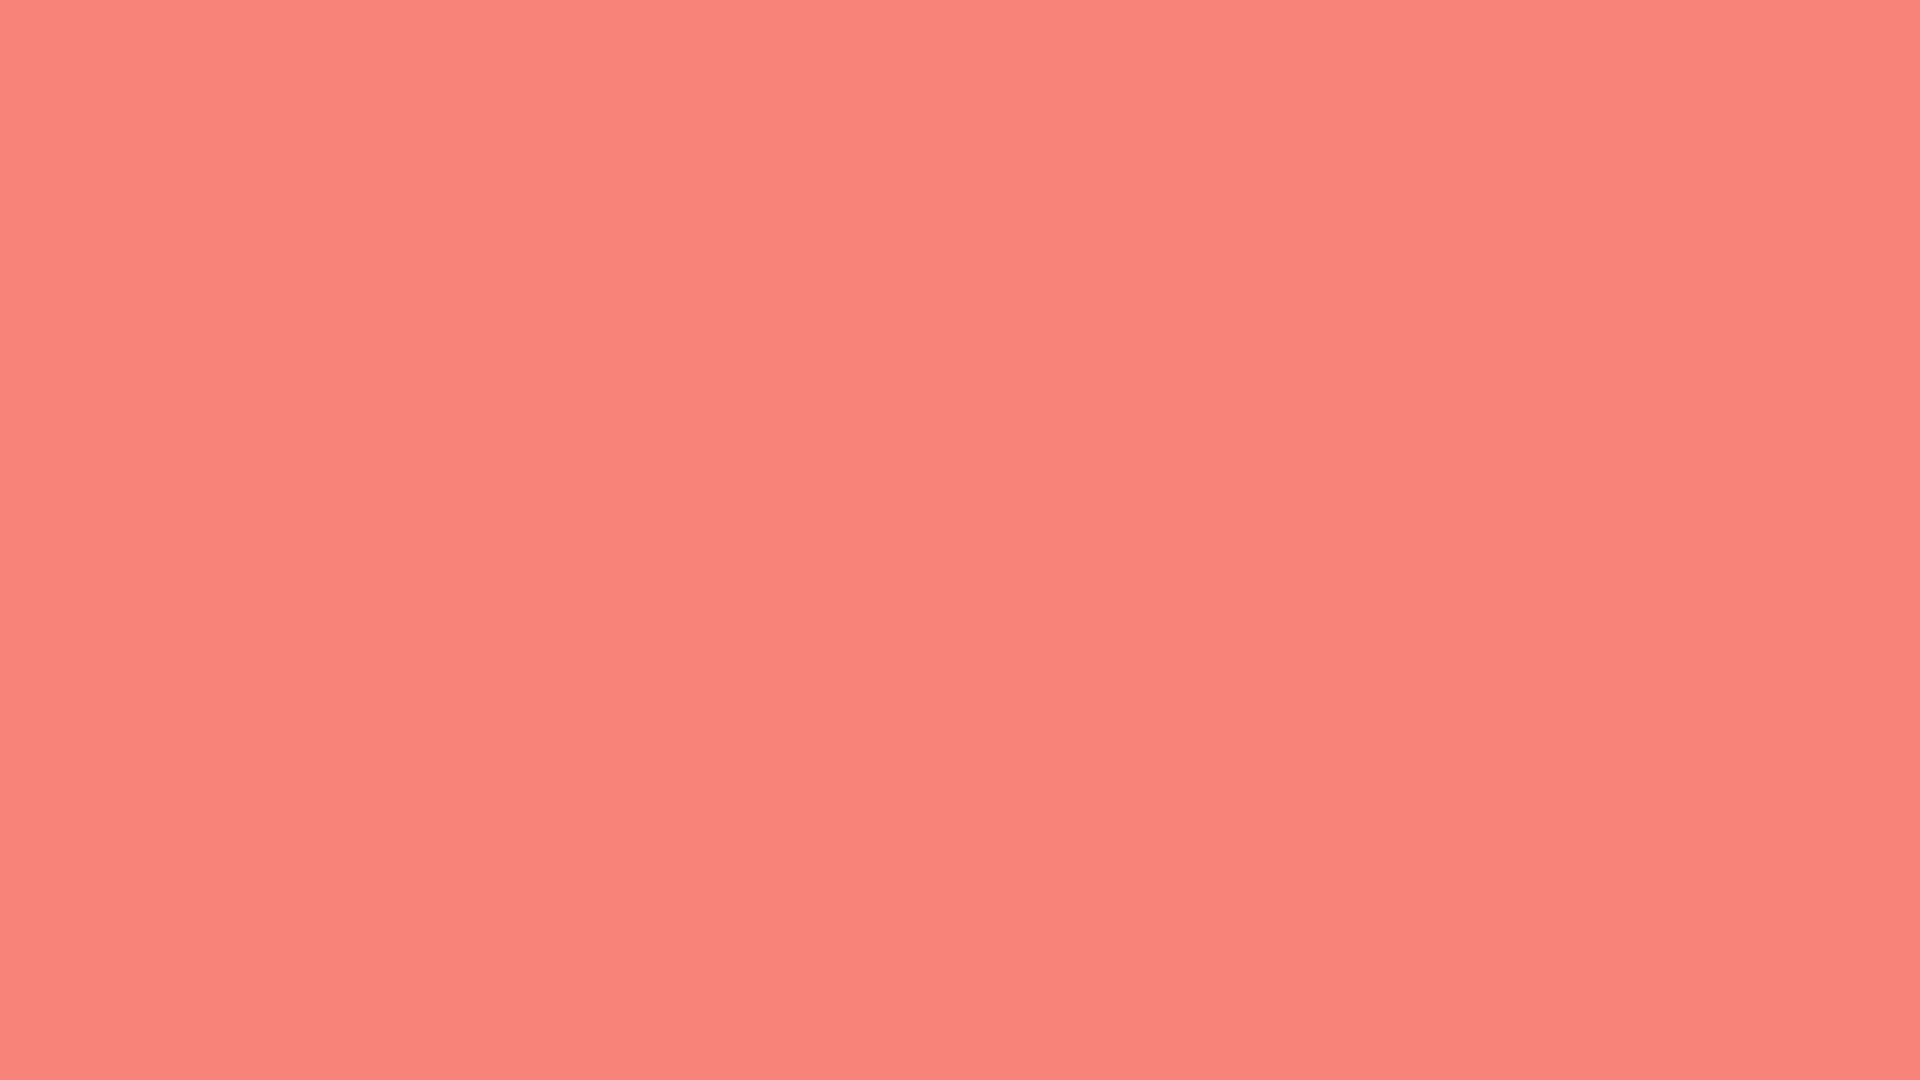 4. "Coral" - wide 8